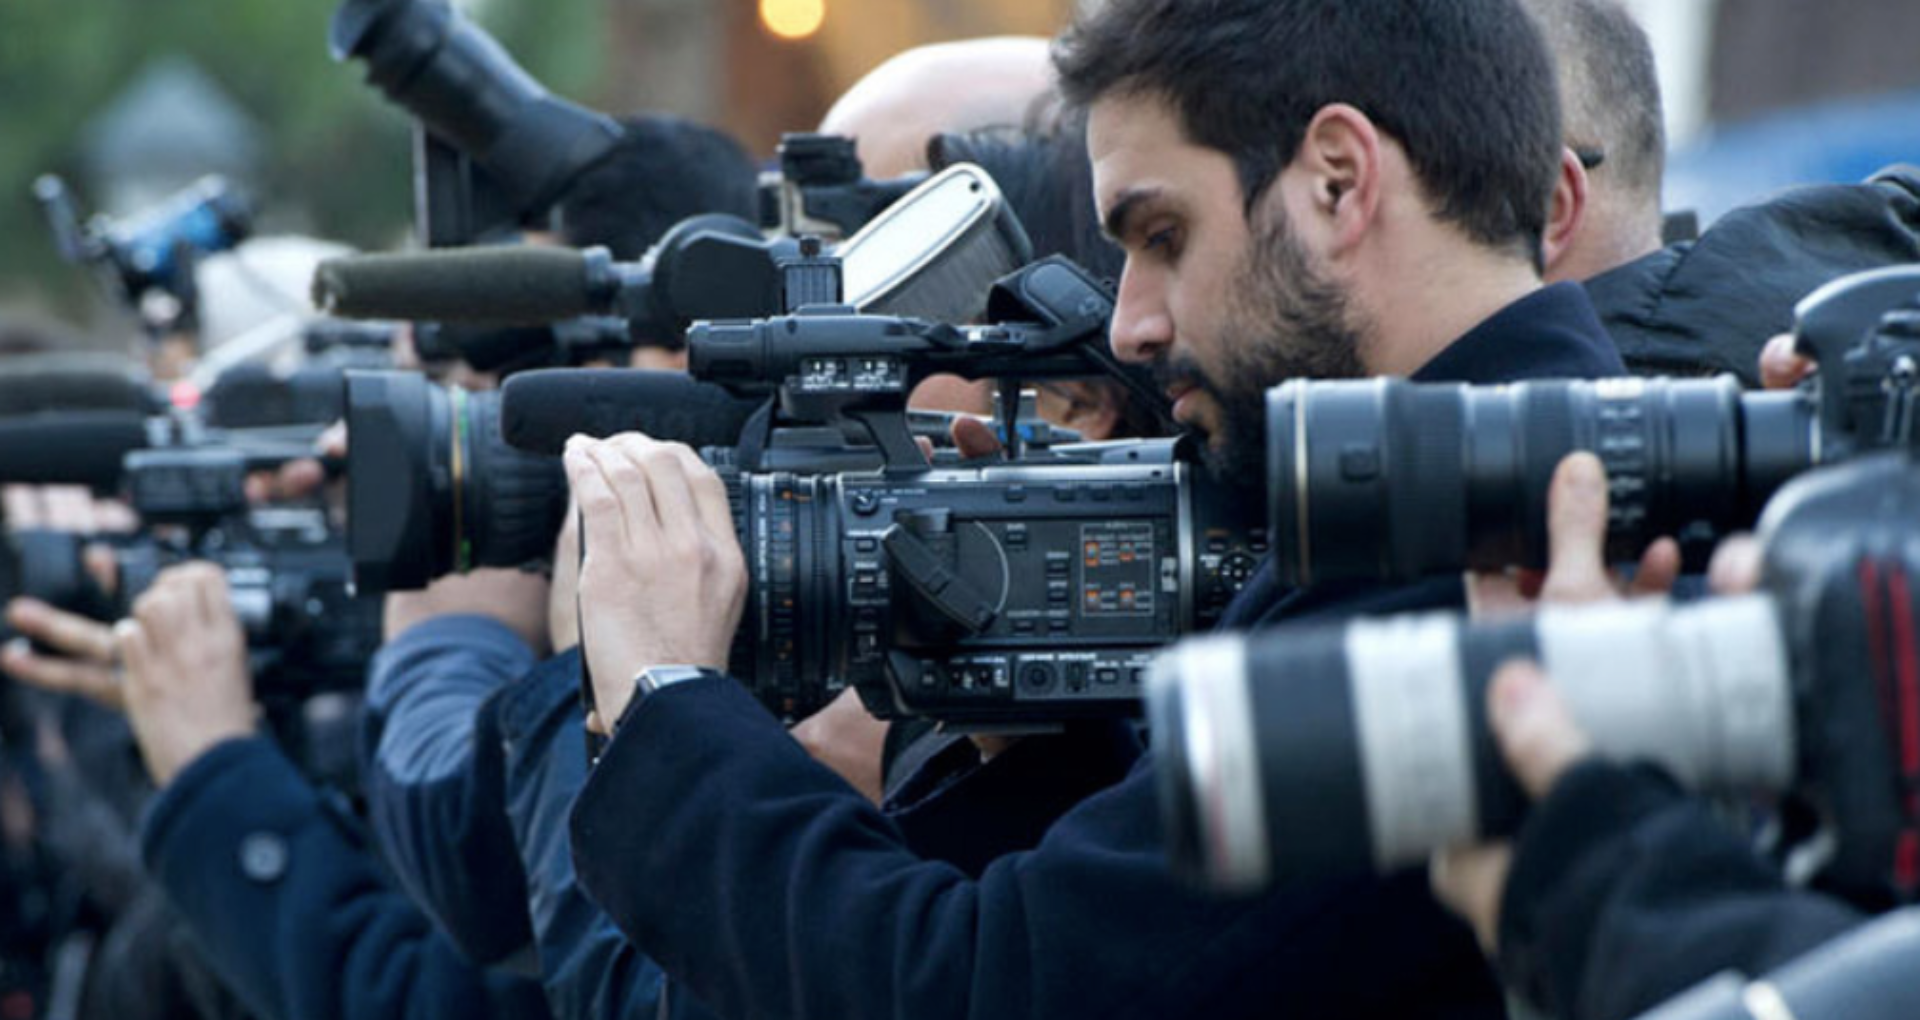 UNESCO Reports an Increase of Attacks on Journalists Worldwide